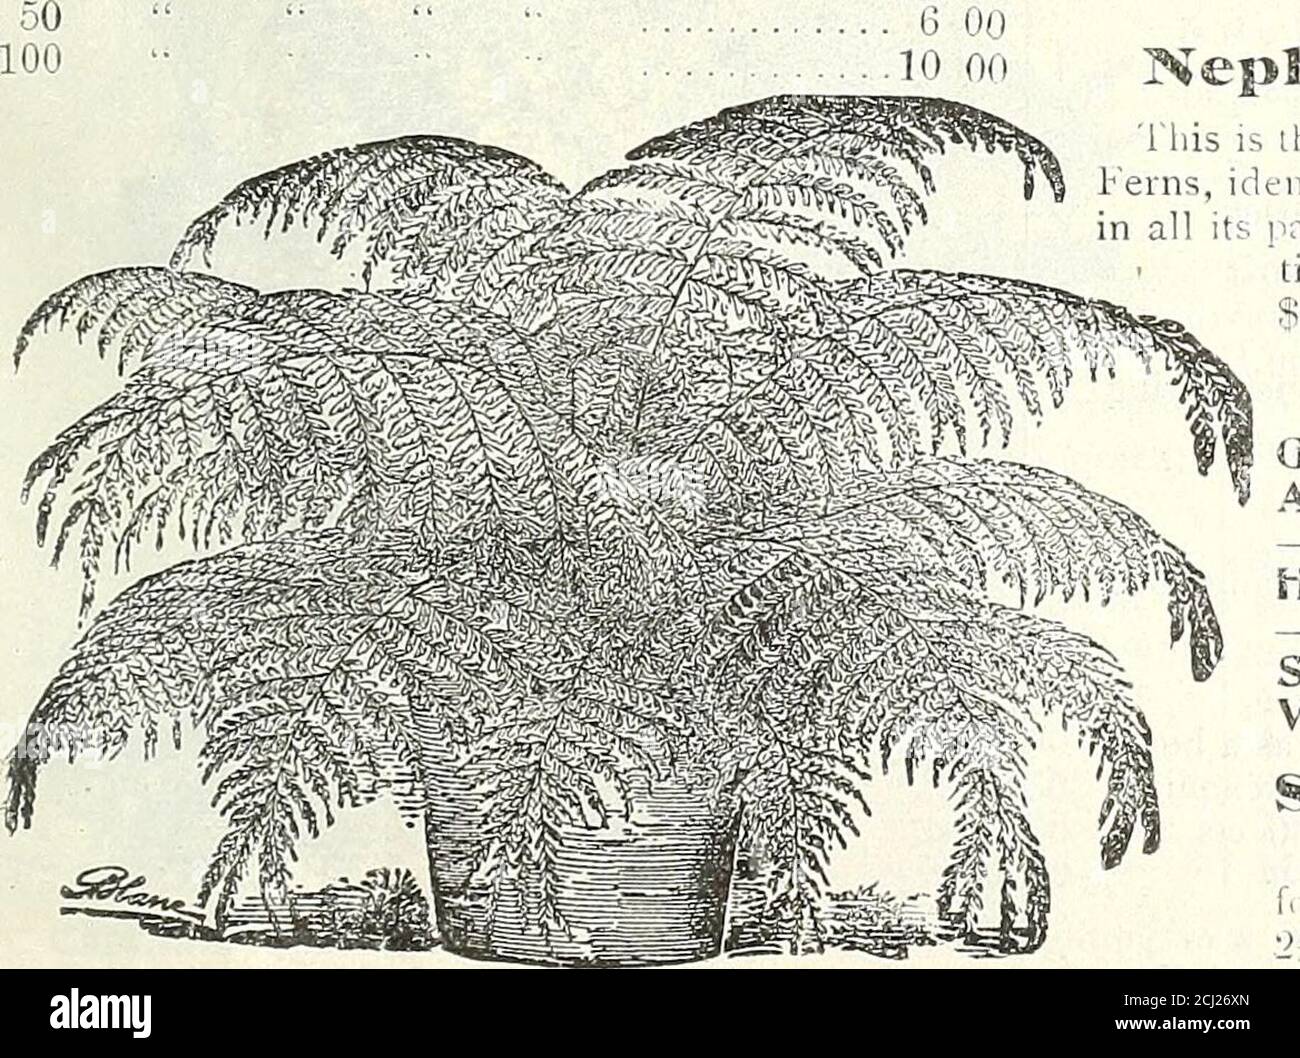 . Dreer's autumn 1904 catalogue . Cn.oTrm Schif.imit (iMe.xican Tree Fern). irolepis Sostossiensis. (The Koston Sword Fern.) I.eauliful lot of this, the most popularof all hou-e (ilants, m the fol-lowing si?es : 3-inch pciis, ]5 cts. each ; 4-inchpots, 25 ct-. each ; 5-inch pots,50 cts. each; 6-inch pots, 75 cts.each ; 7-inch pots, $1 00 each ;8-inch pots, $2.00 each ; 12-inehr-aiis, $5 OOencli. Neplirolepis FierscEiii. (The New Boston or iia-tiieh Ilunie 5 erii.) 1 his new Fern  osses-es the snme vigorous growth that IS characteristic of the Boston Fern, with long, graceful fronds, but with Stock Photo